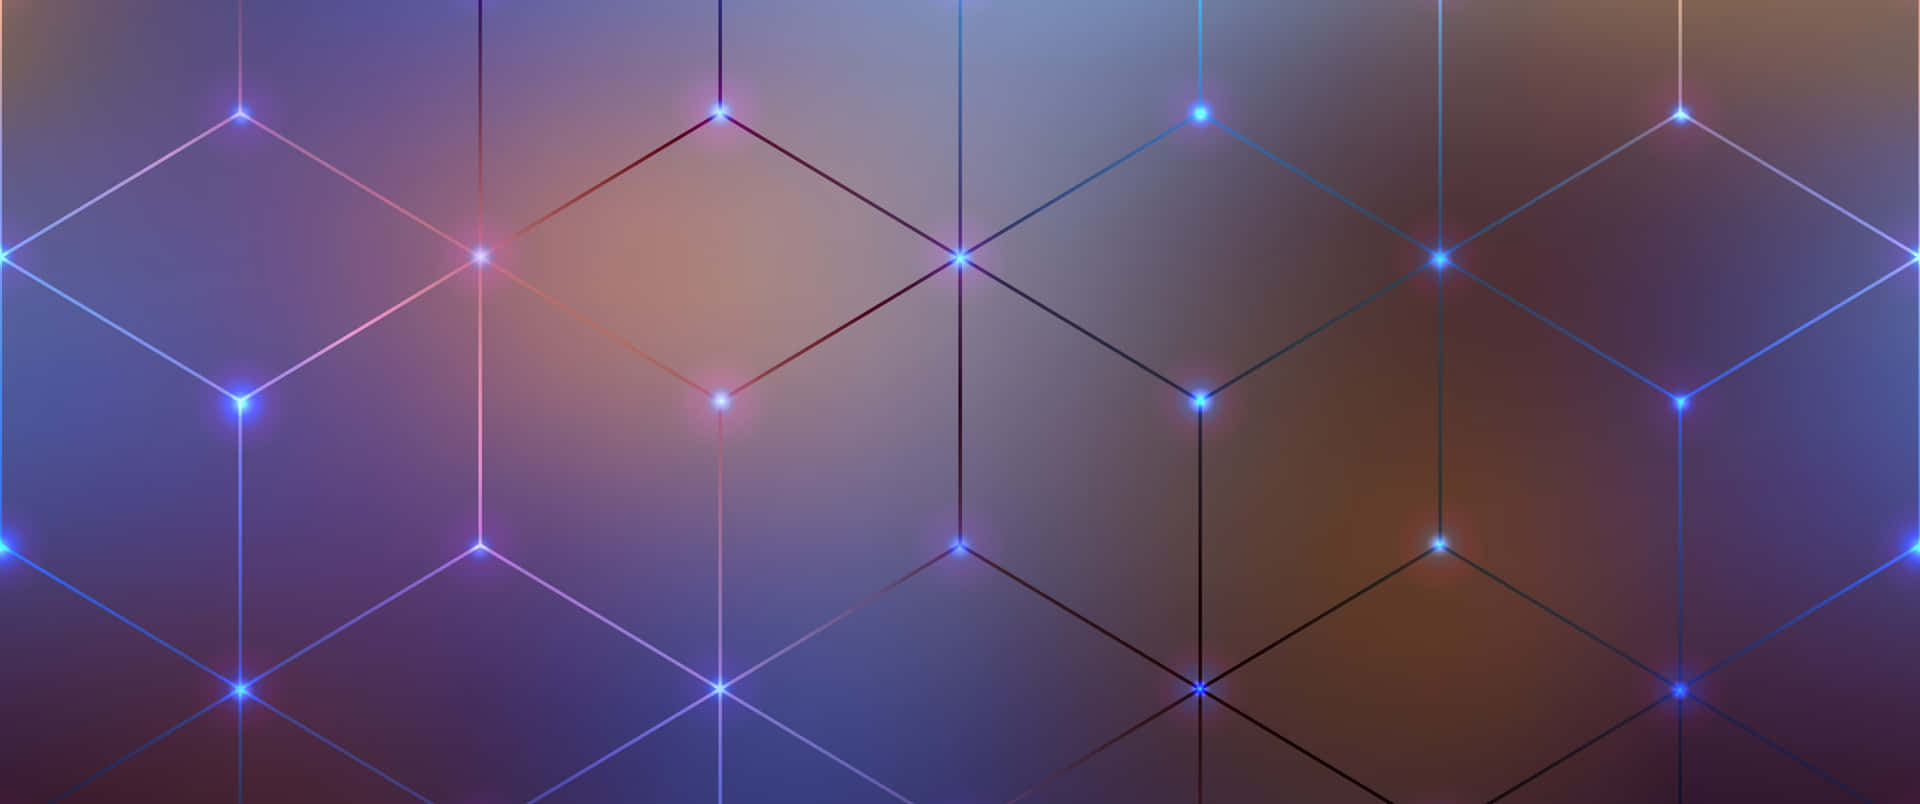 Connected 3D Cube Patterns Wallpaper